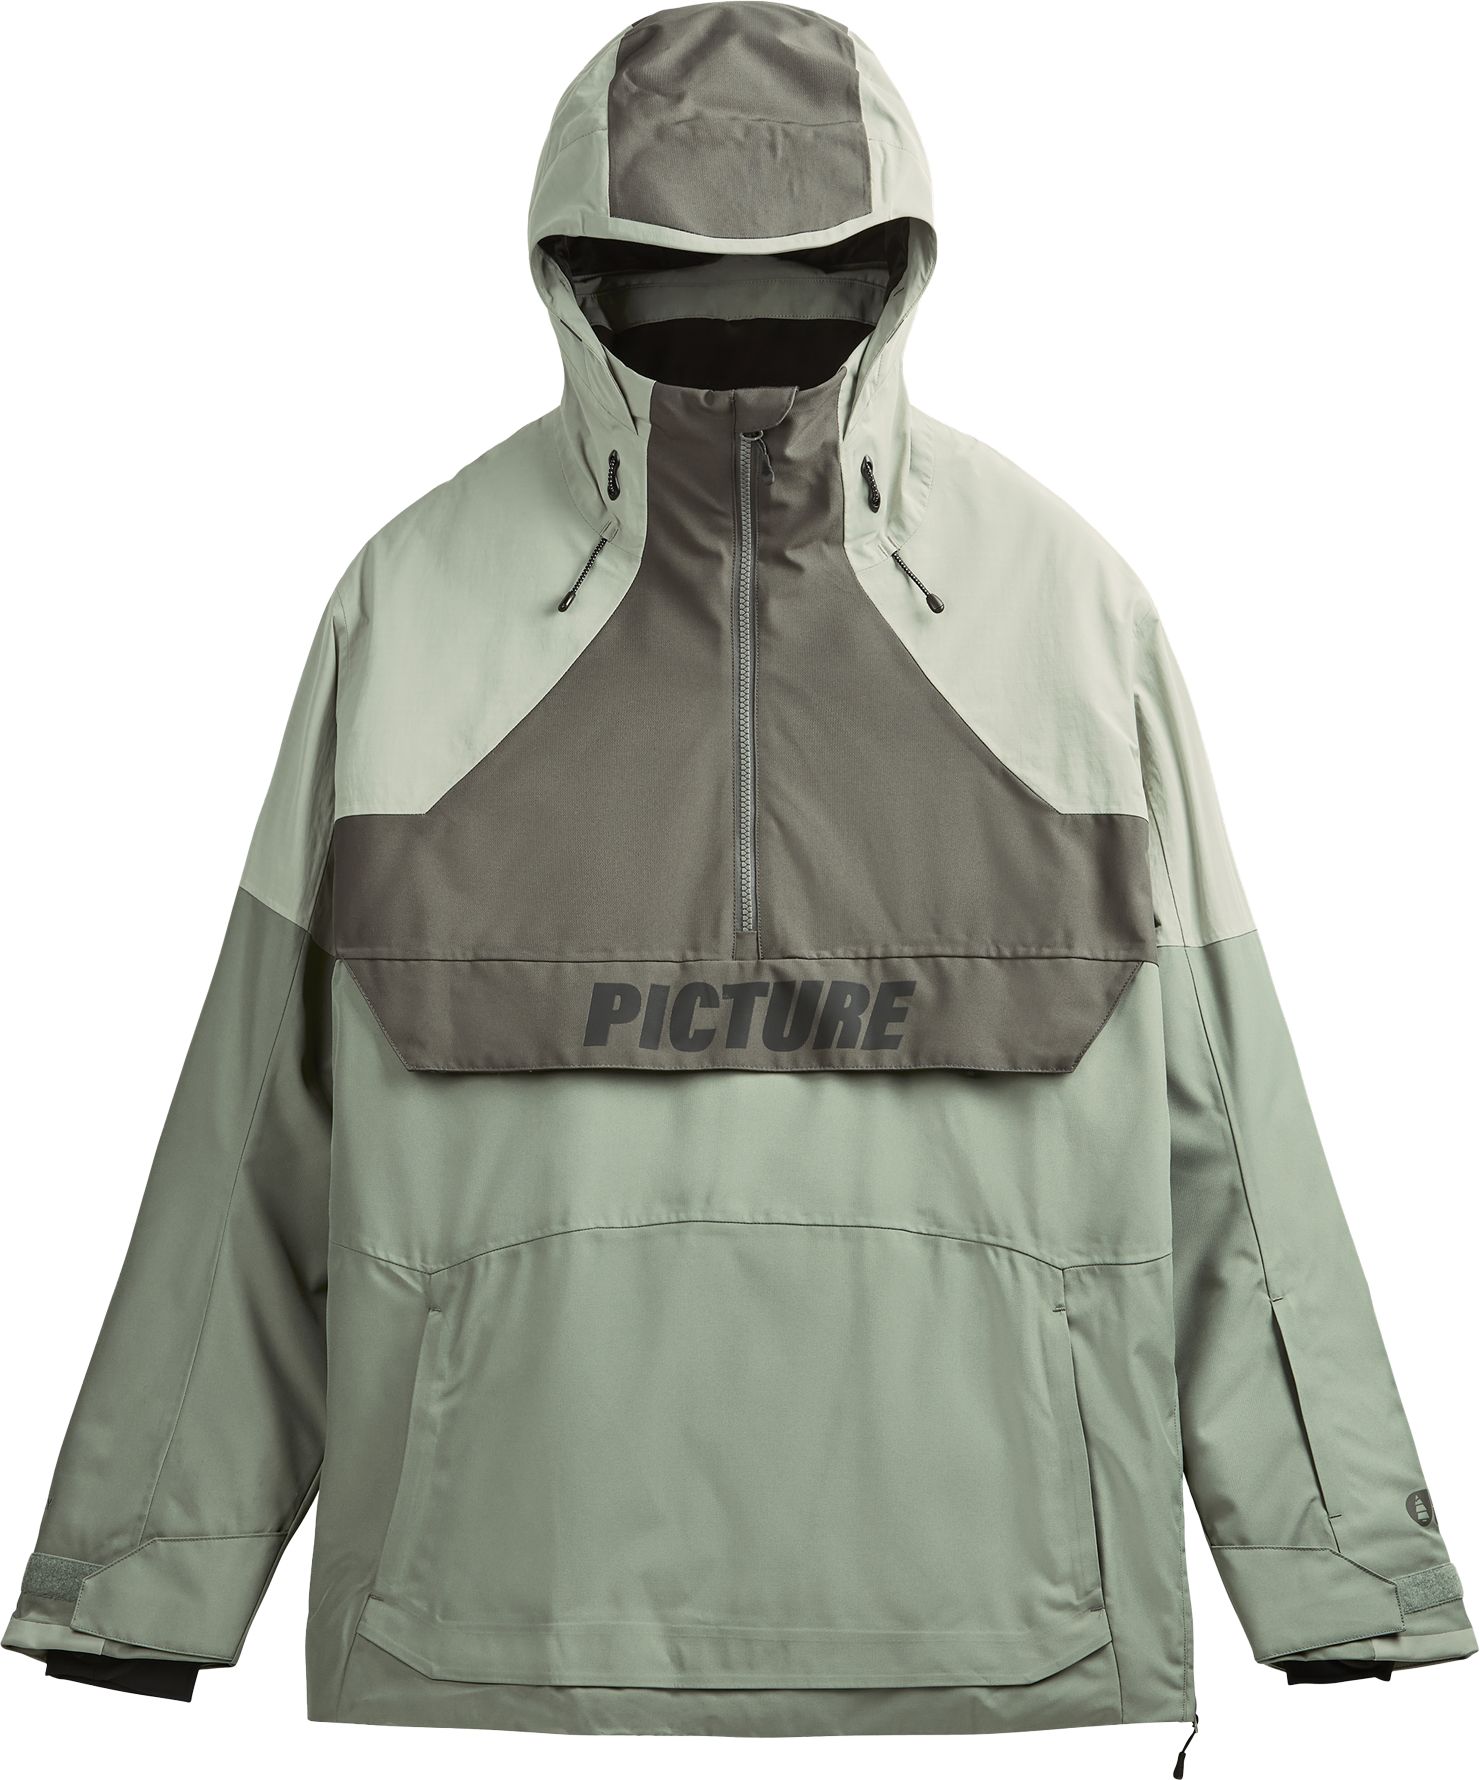 PICTURE, M OCCAN JACKET